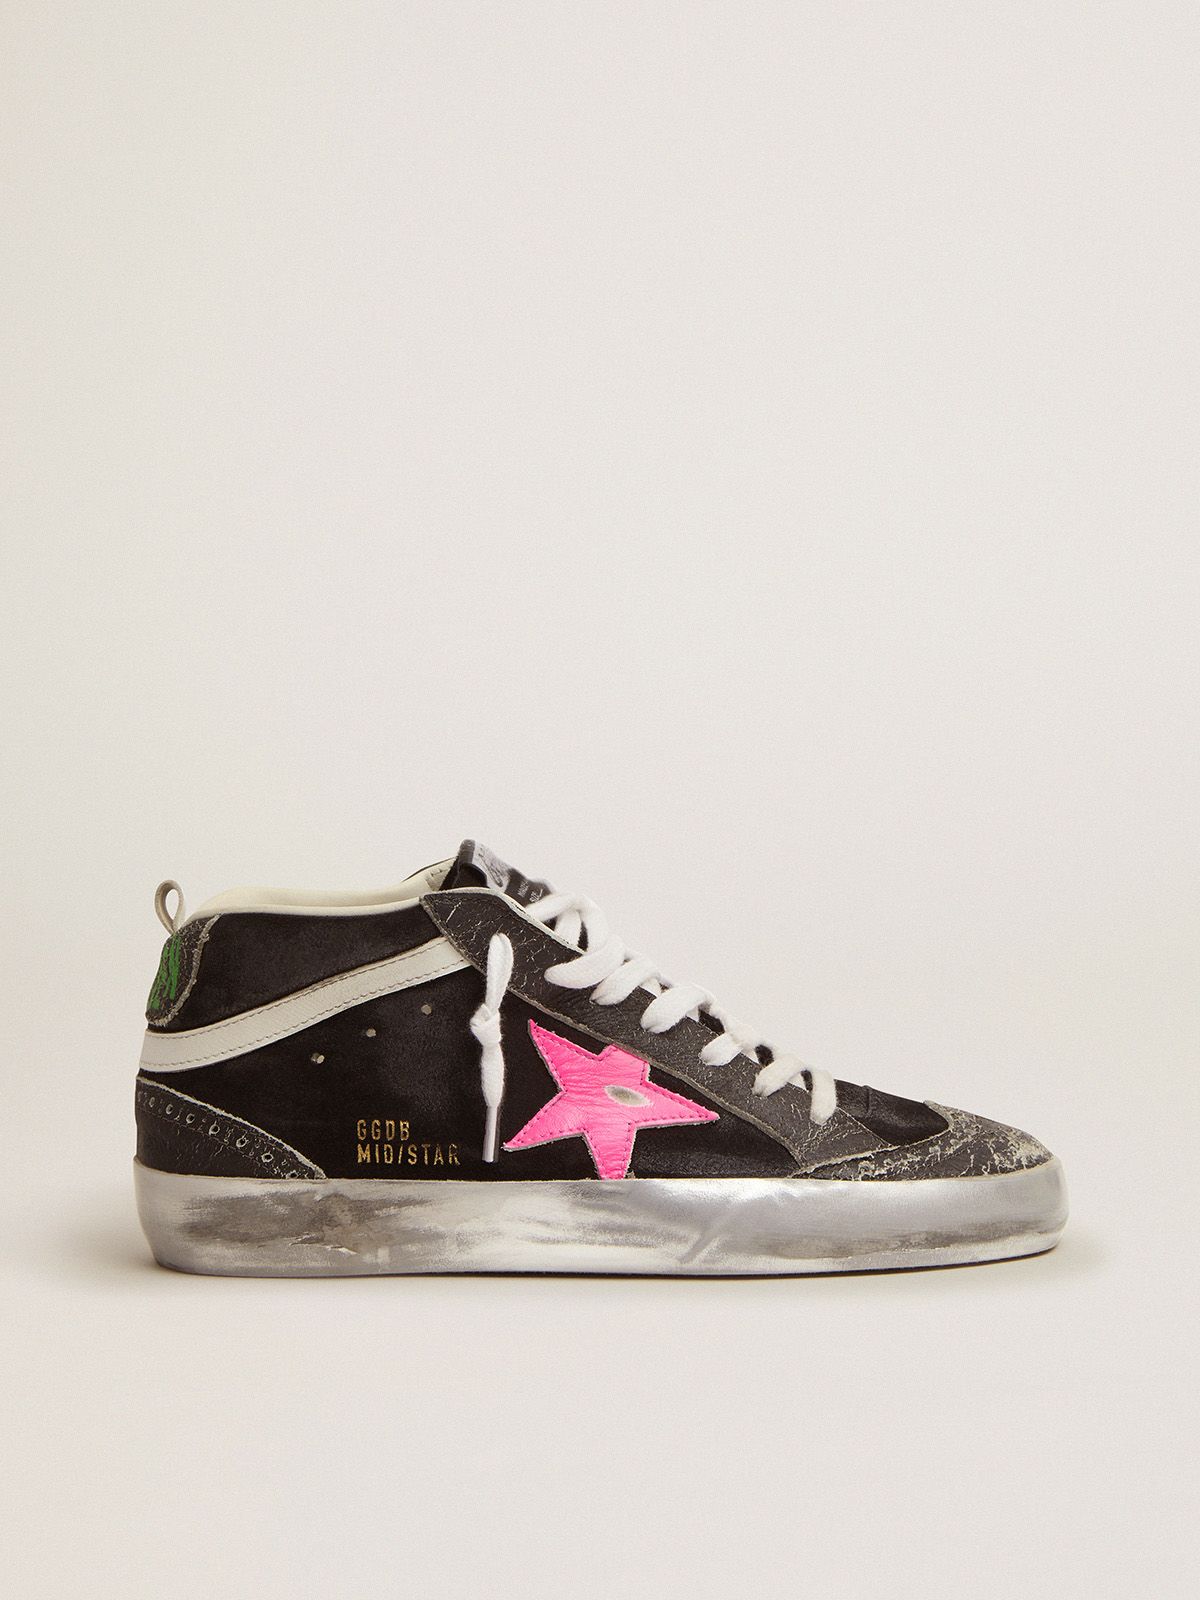 Mid Star sneakers in black suede with crackle leather details